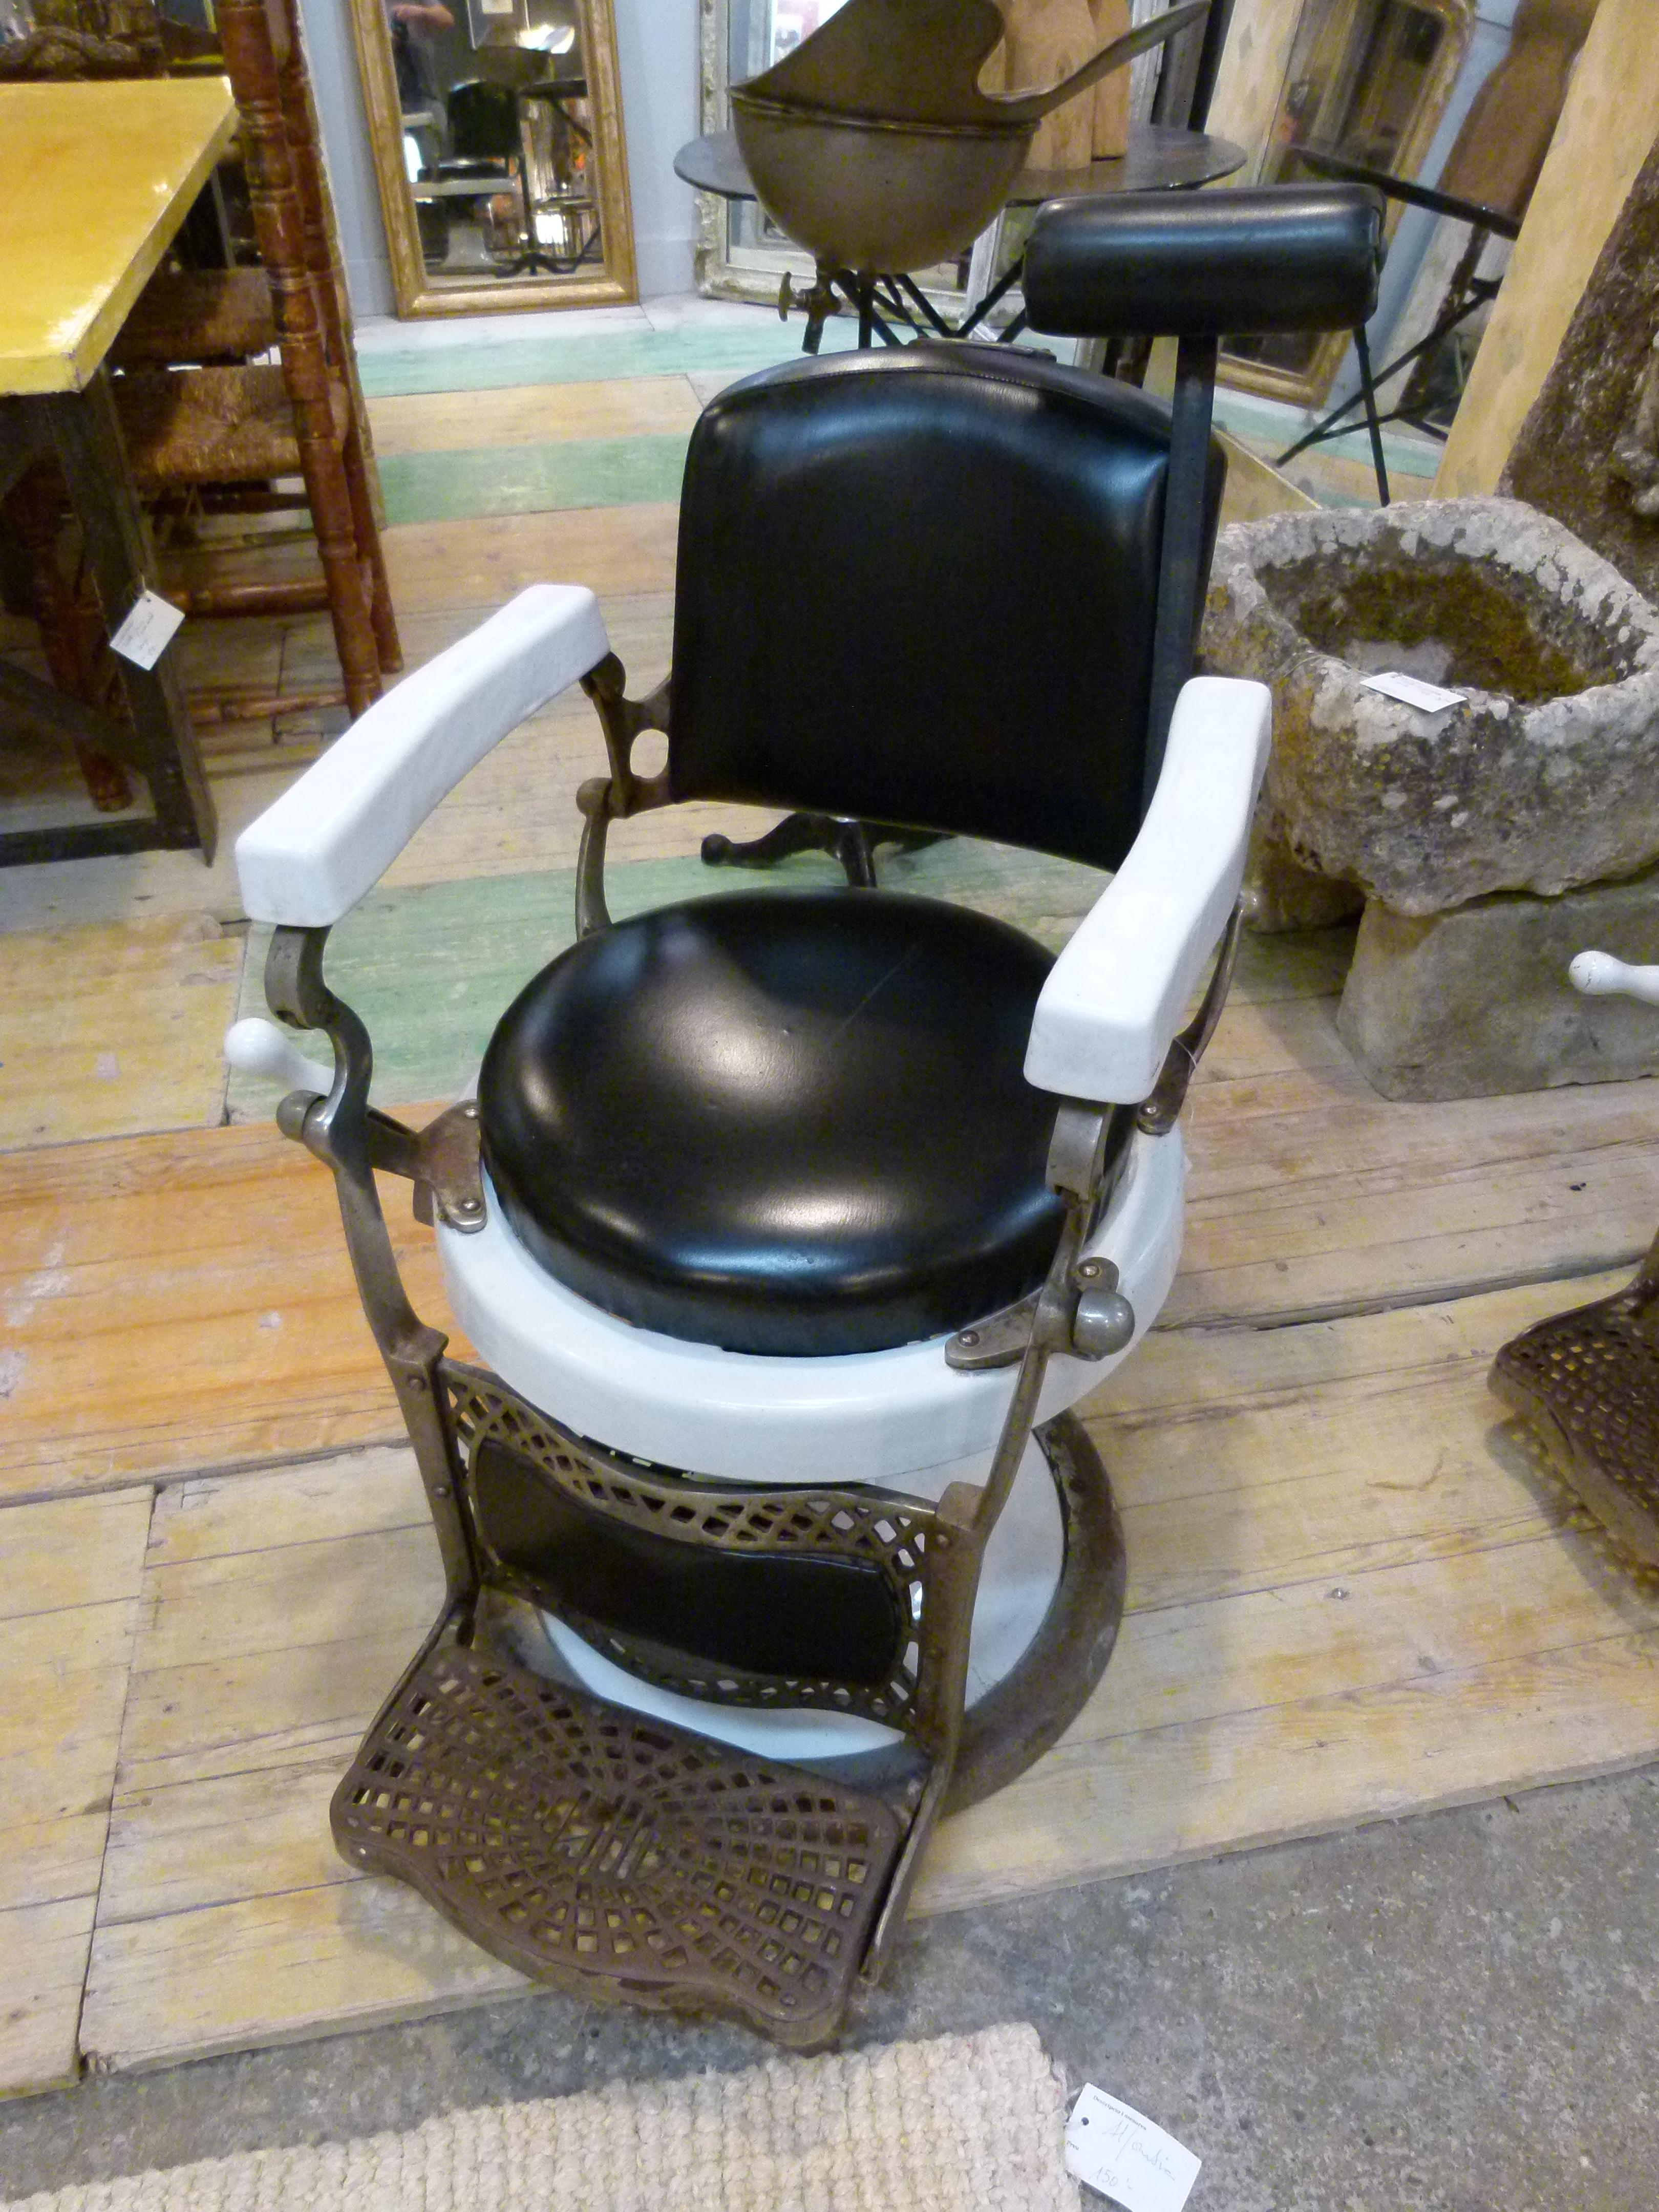 Early 20th century Spanish Barber Armchair. The leather seat is adjustable up to 50 cm (19.6 in) and swivel.
Made of porcelain and cast iron. 
This wonderful Baber Armchair is ideal to bring charm and curiosity to your business.



 
 